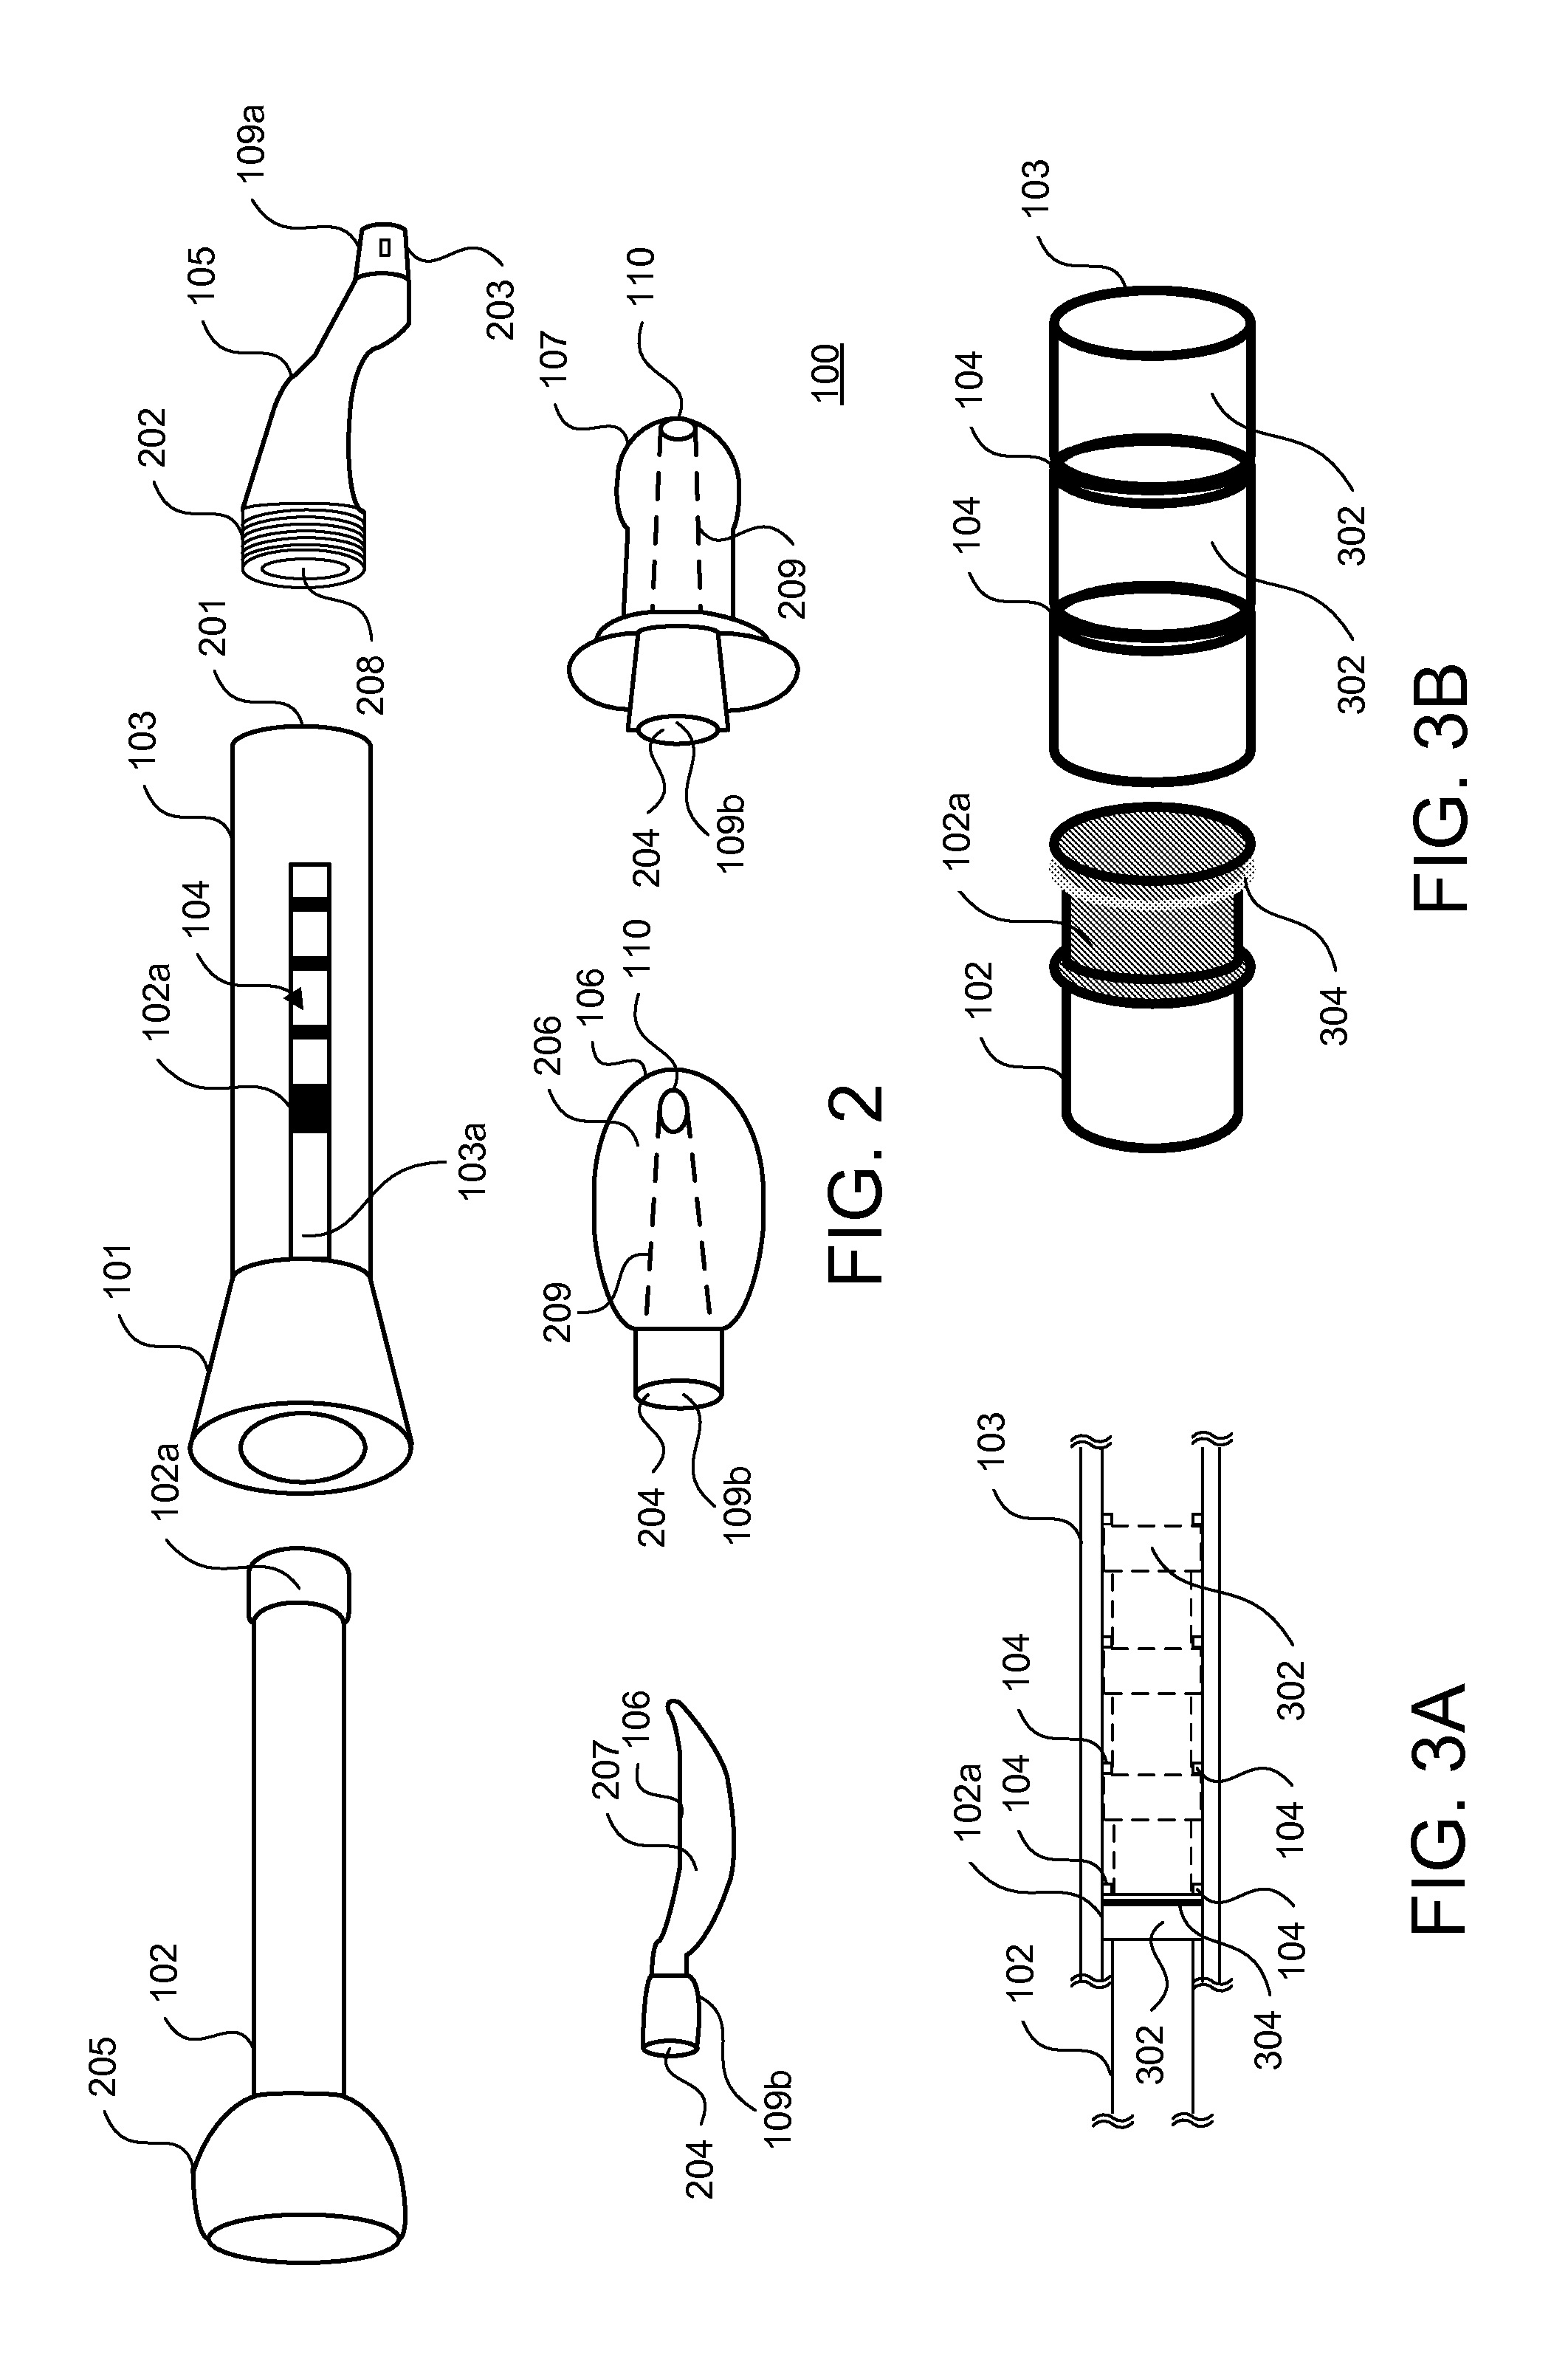 Infant feeding spoon with attachments for dispensing food